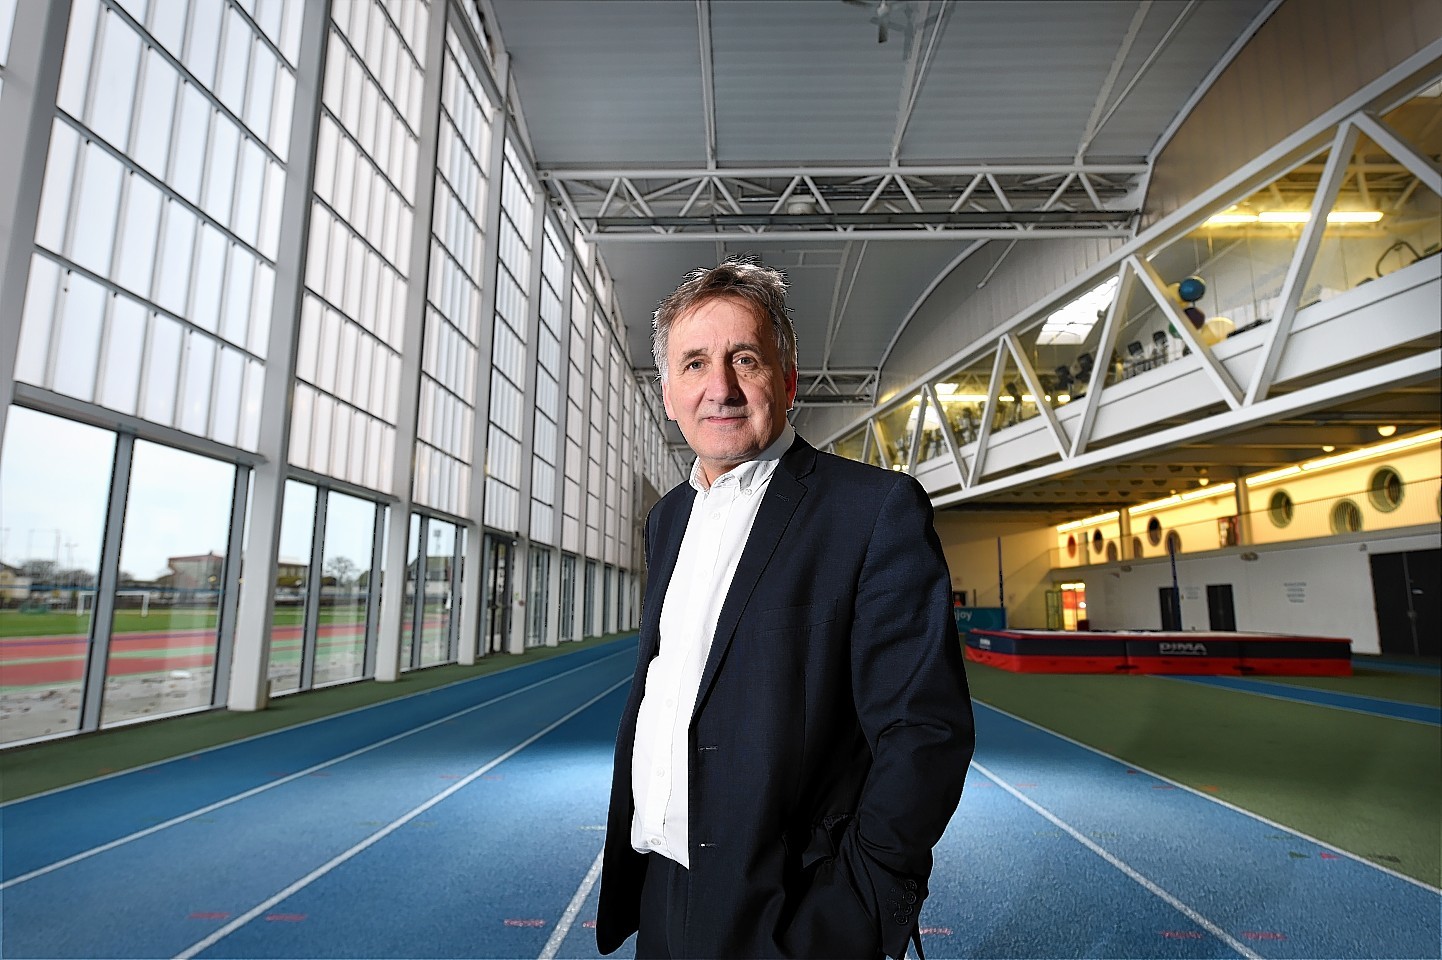 Mr Yule back at the Sports Village after confirming his plans to step down